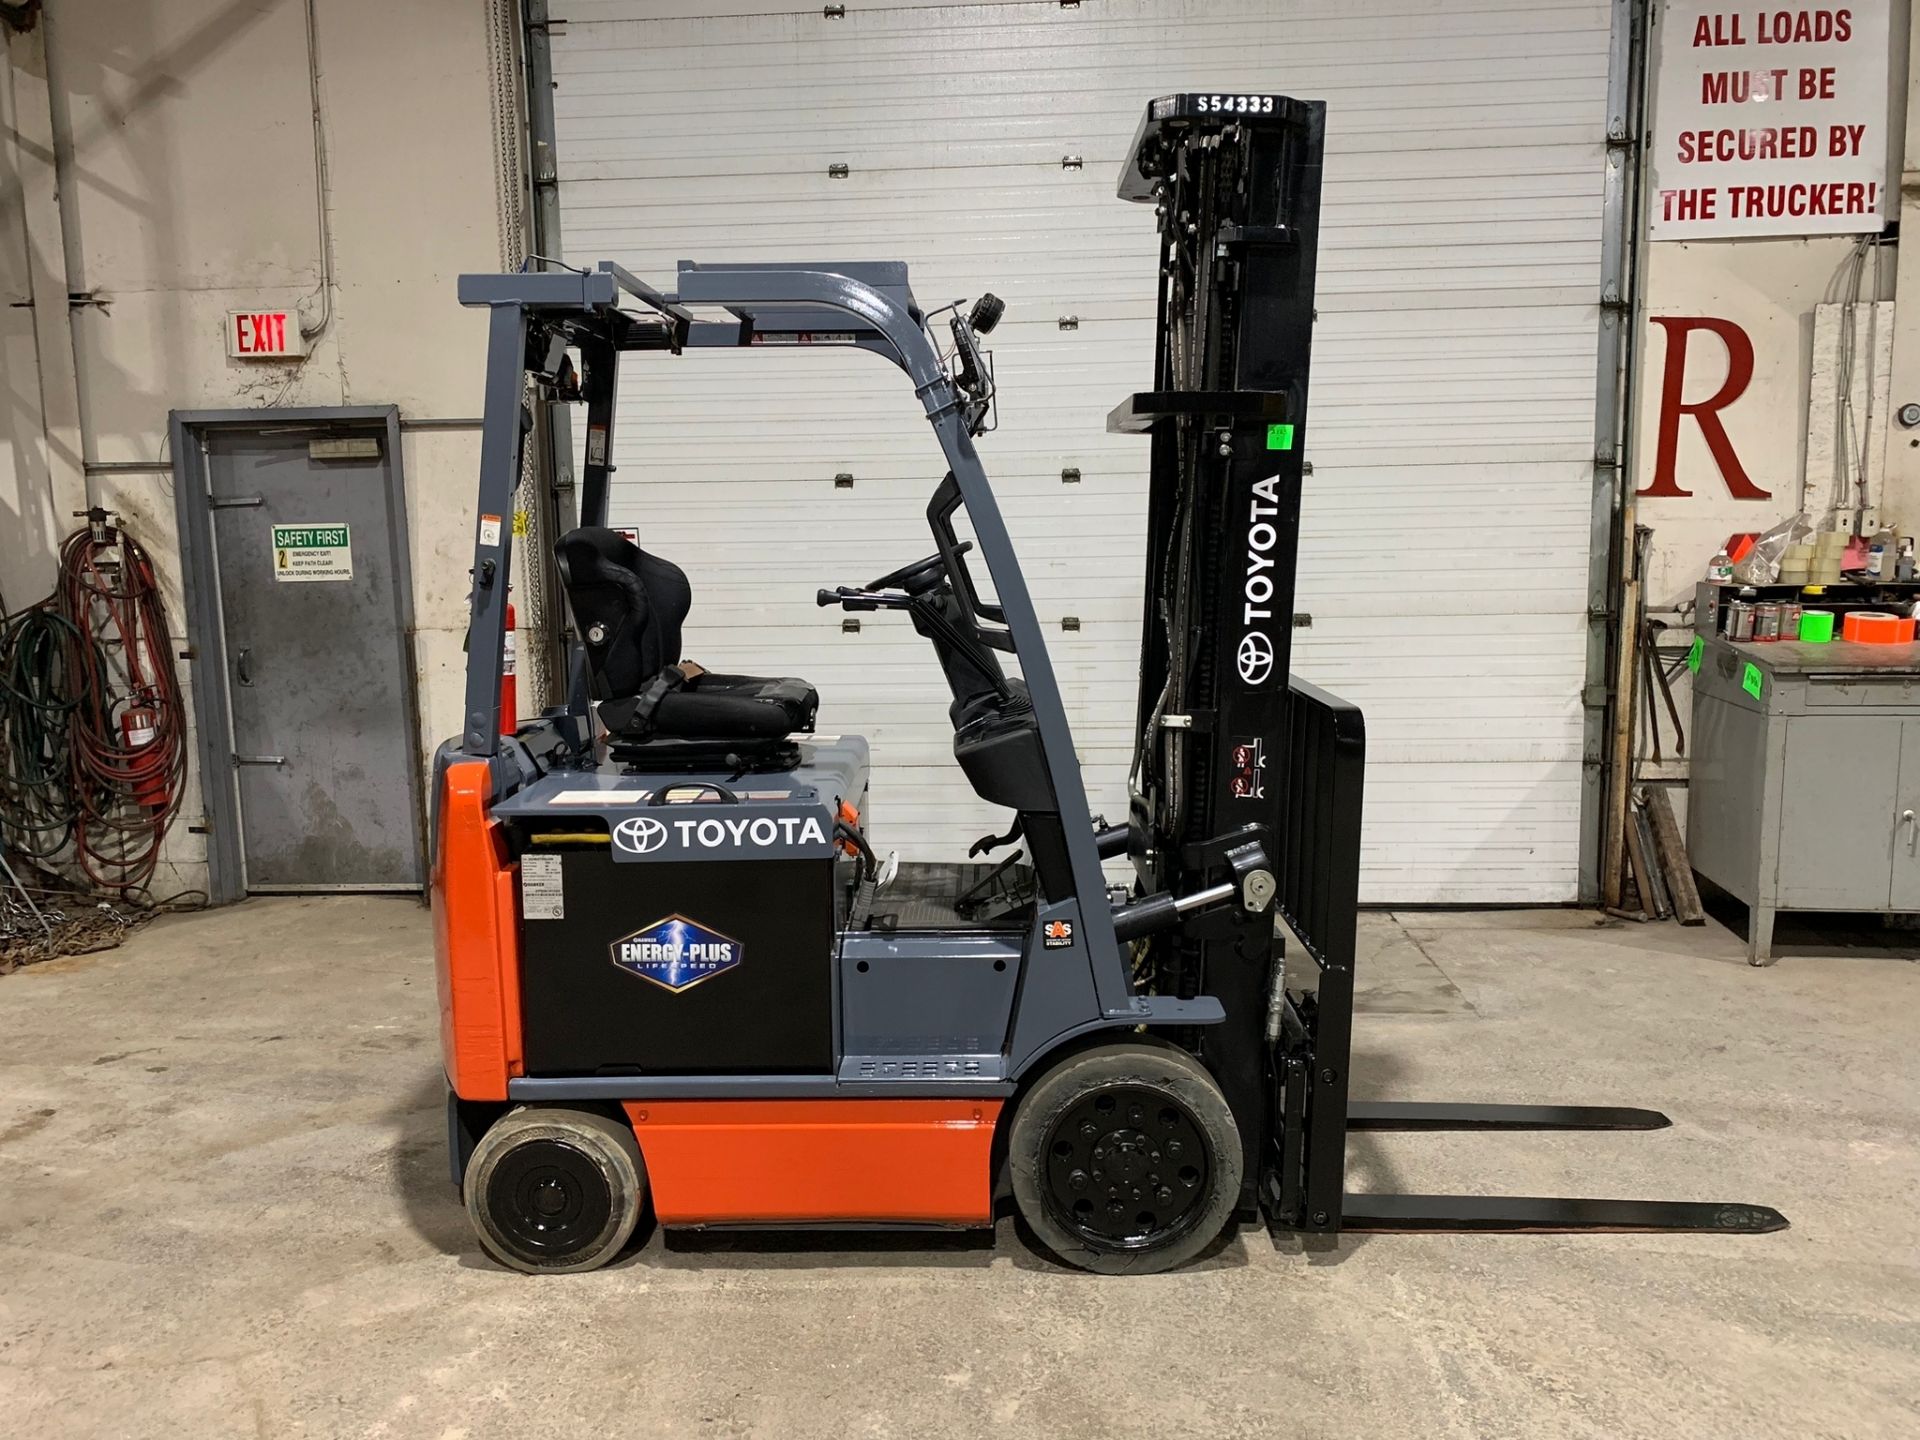 ***NICE Toyota 25 - 5,000lbs Capacity Forklift Electric with Sideshift 3-stage mast 48V - FREE